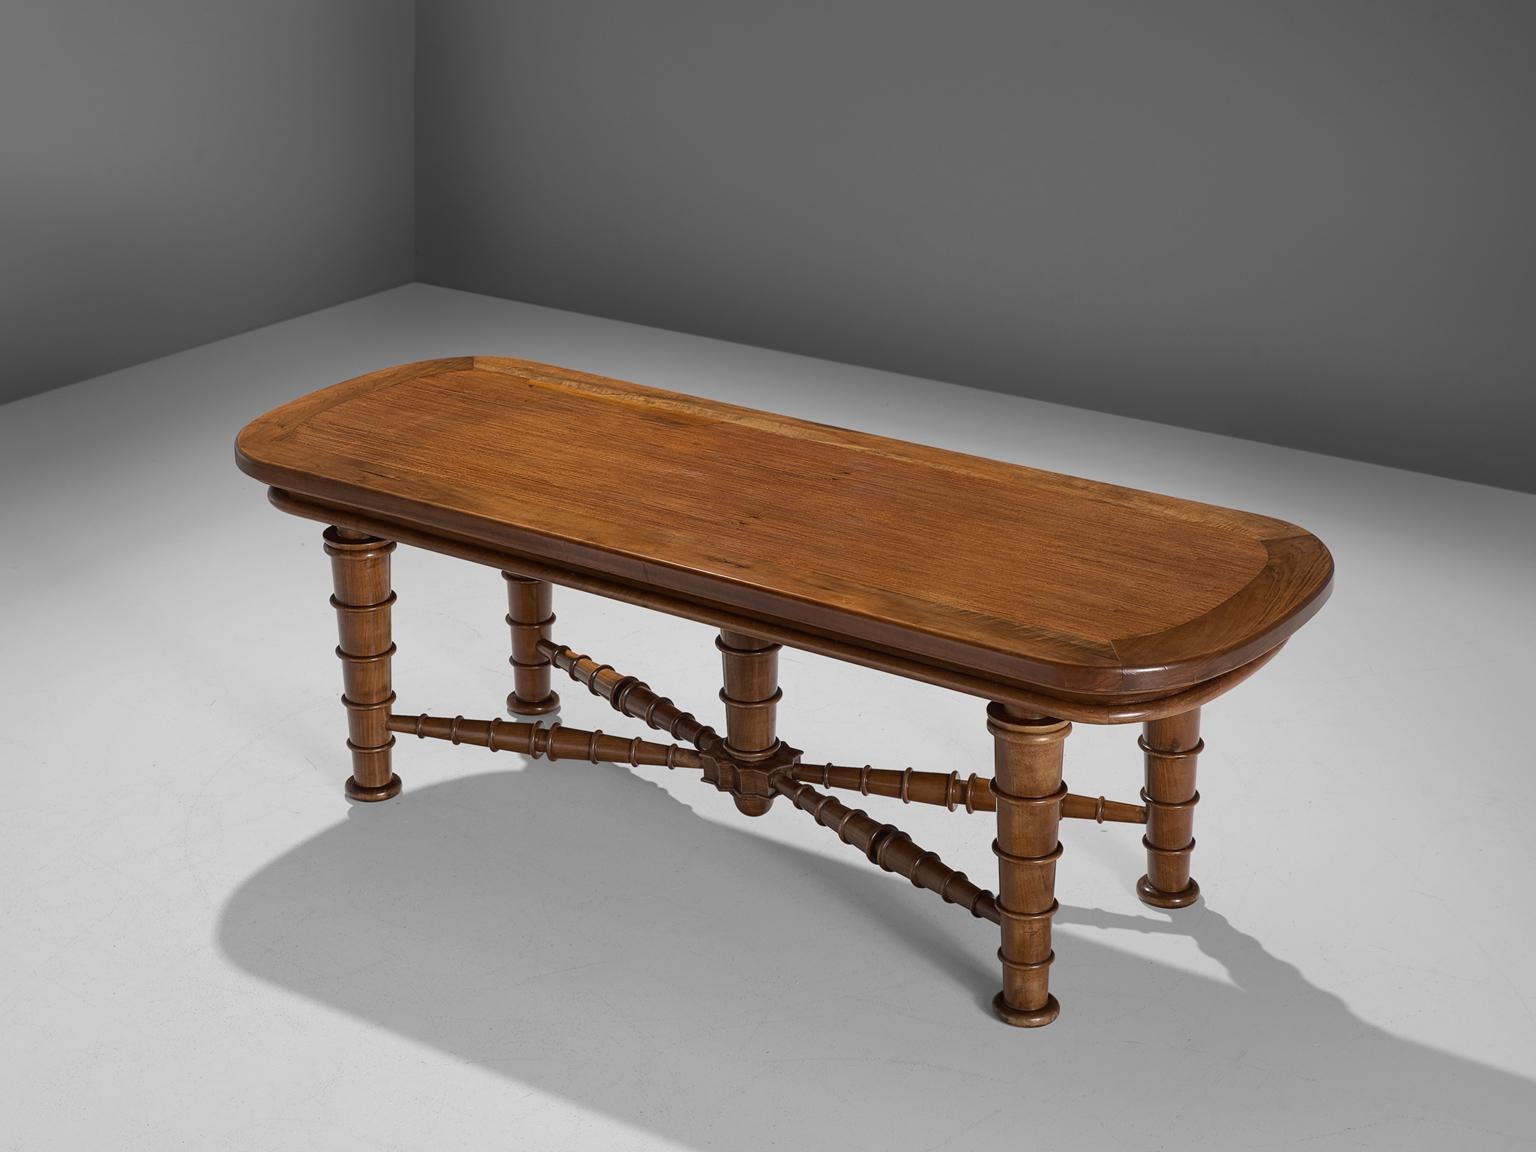 Dining table, walnut, wood, metal, Italy, 1940s

This early midcentury Italian table has an rounded and bordered rectangular top. The decorative legs are tapered and feature five circles each from top to bottom. The table has a fifth 'leg' in the